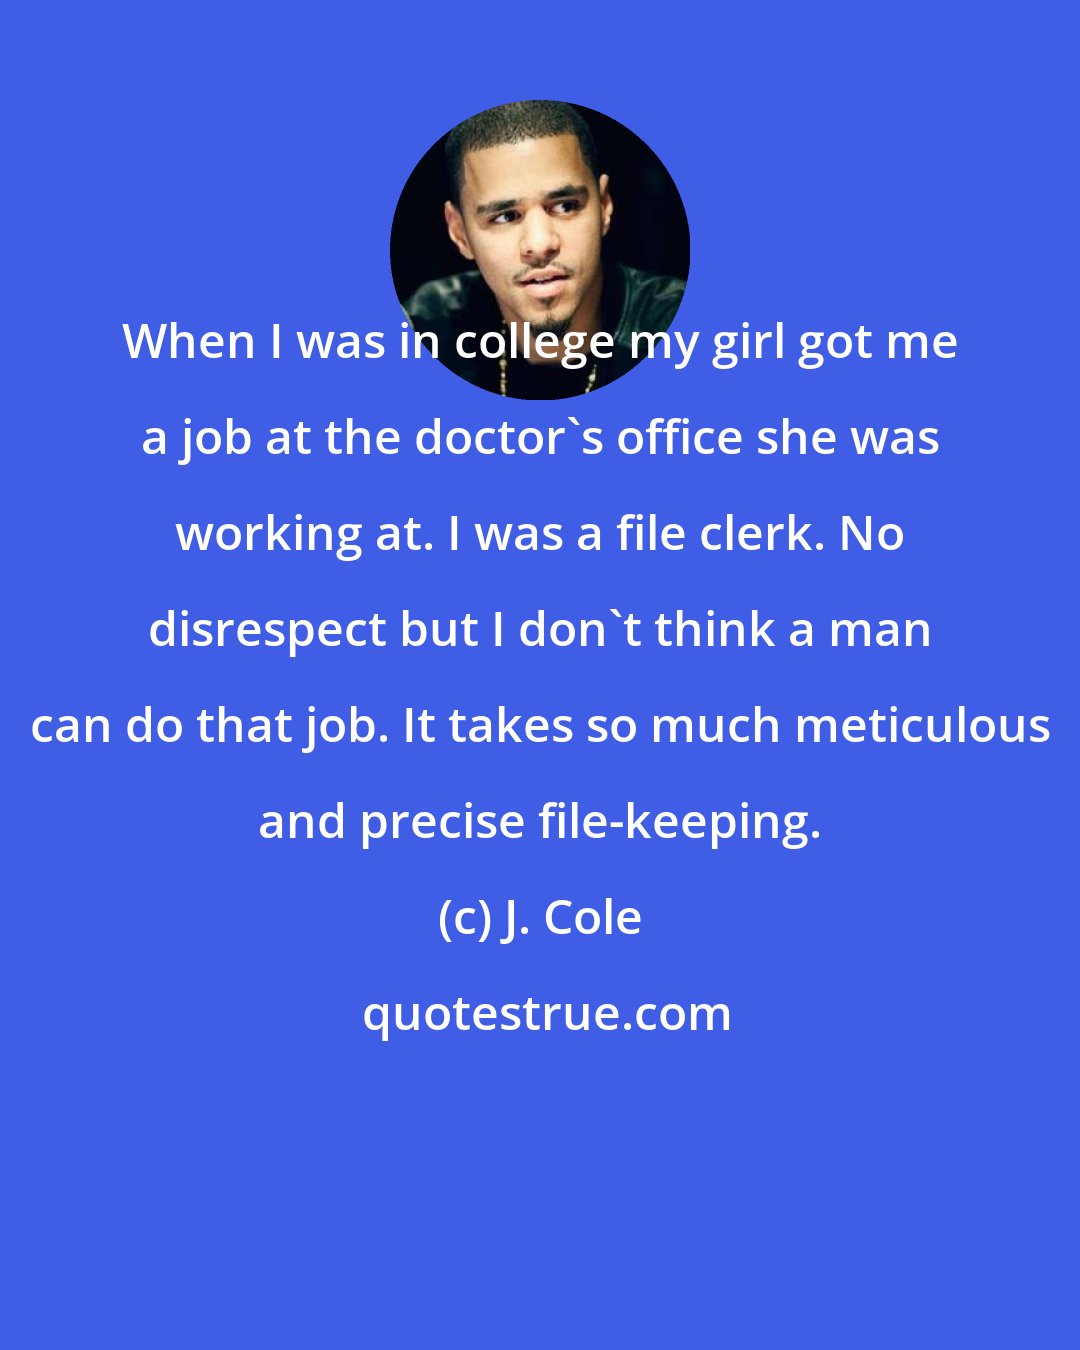 J. Cole: When I was in college my girl got me a job at the doctor's office she was working at. I was a file clerk. No disrespect but I don't think a man can do that job. It takes so much meticulous and precise file-keeping.